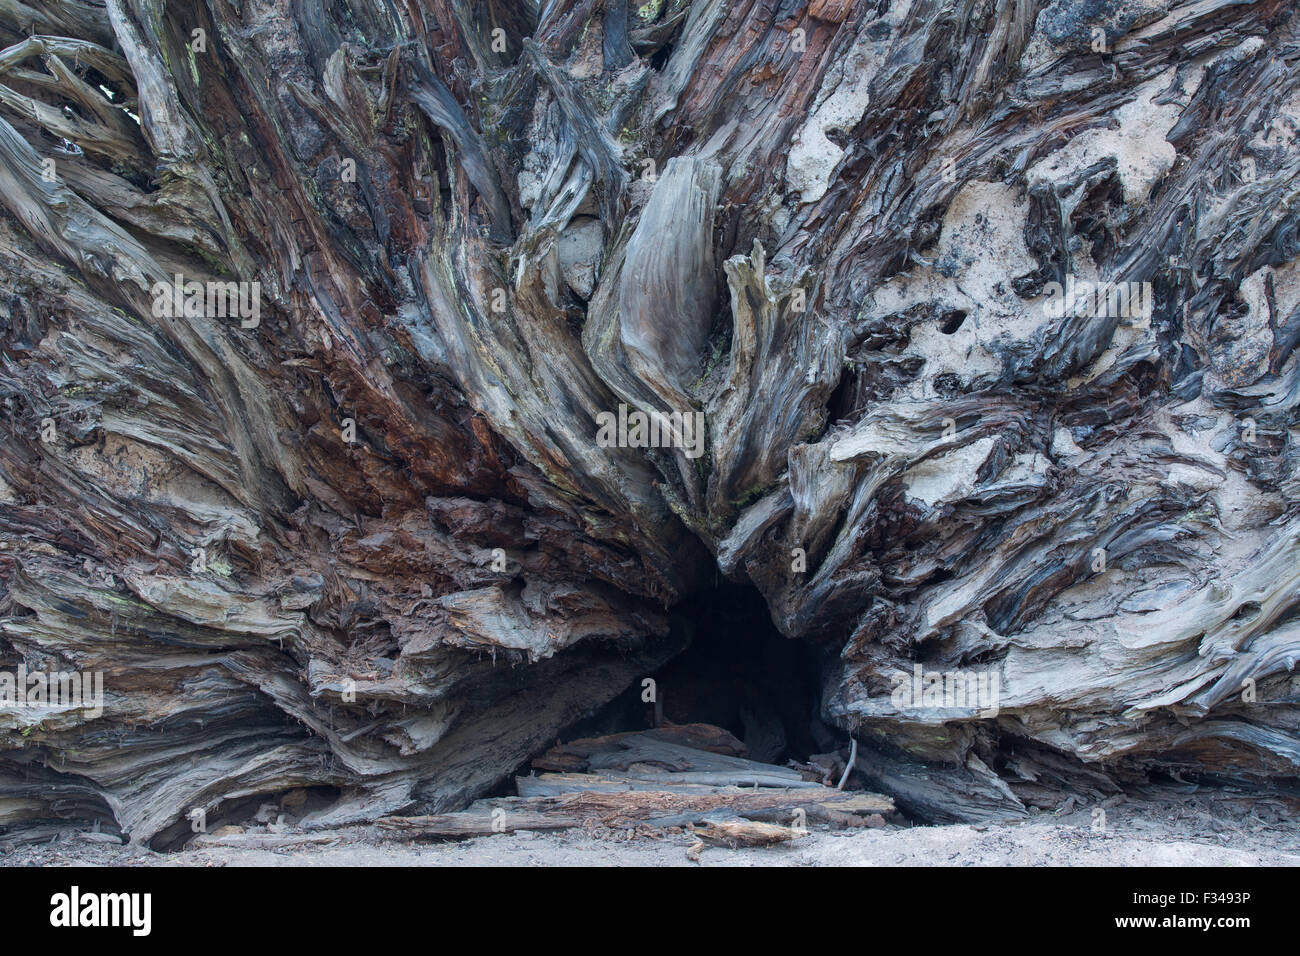 tree roots, Crescent Meadow, Sequoia National Park, California, USA Stock Photo